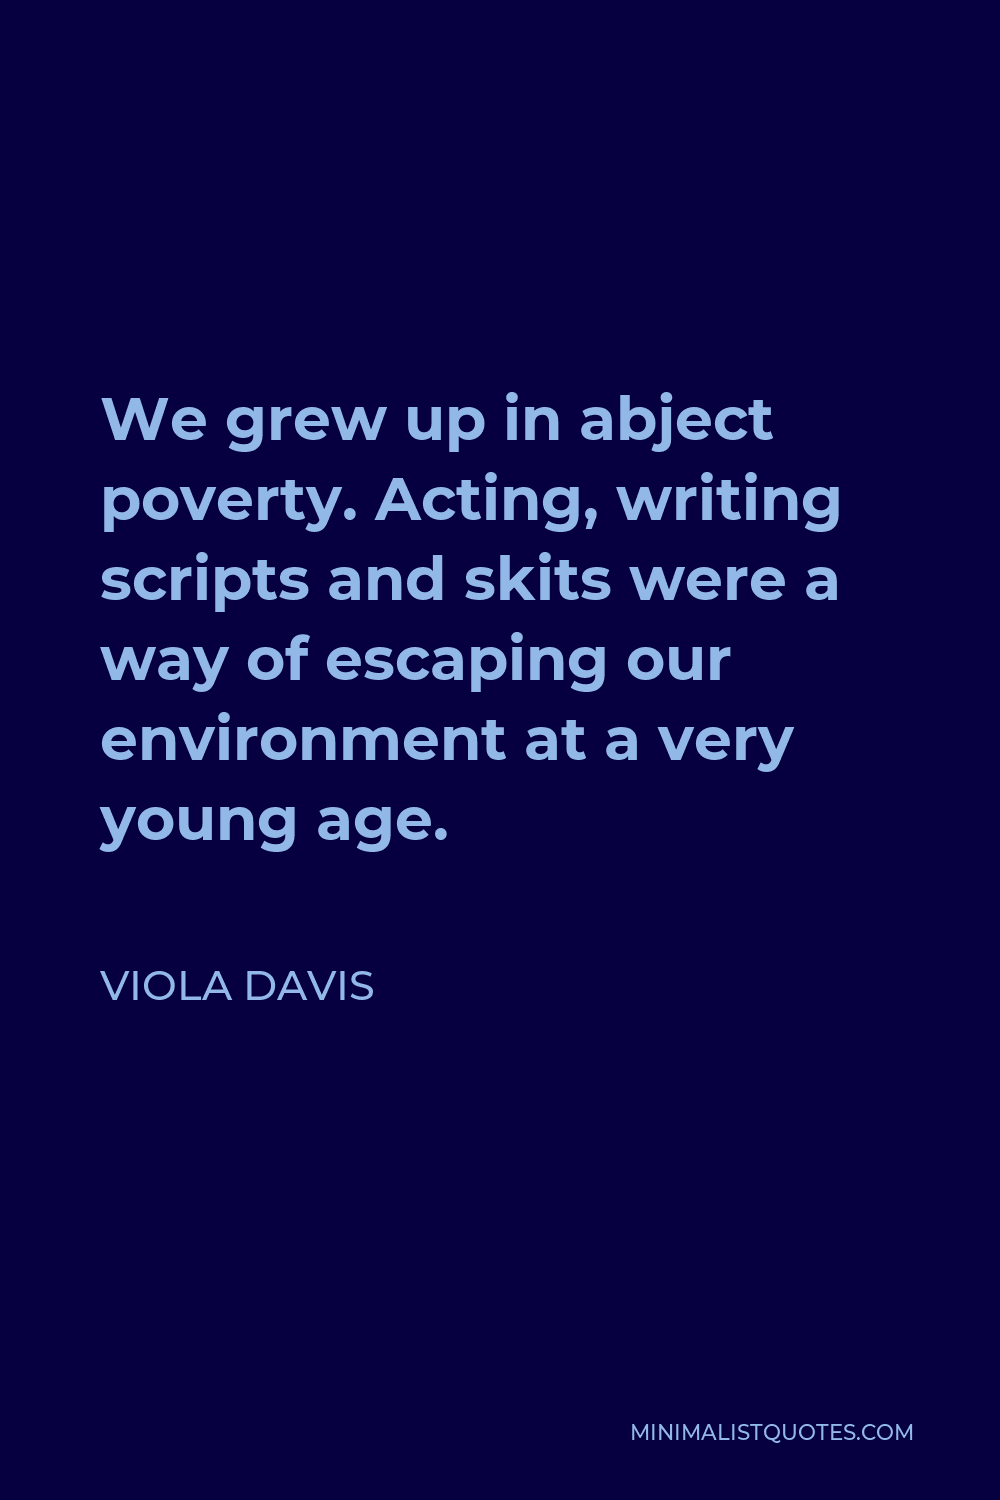 Viola Davis Quote - We grew up in abject poverty. Acting, writing scripts and skits were a way of escaping our environment at a very young age.